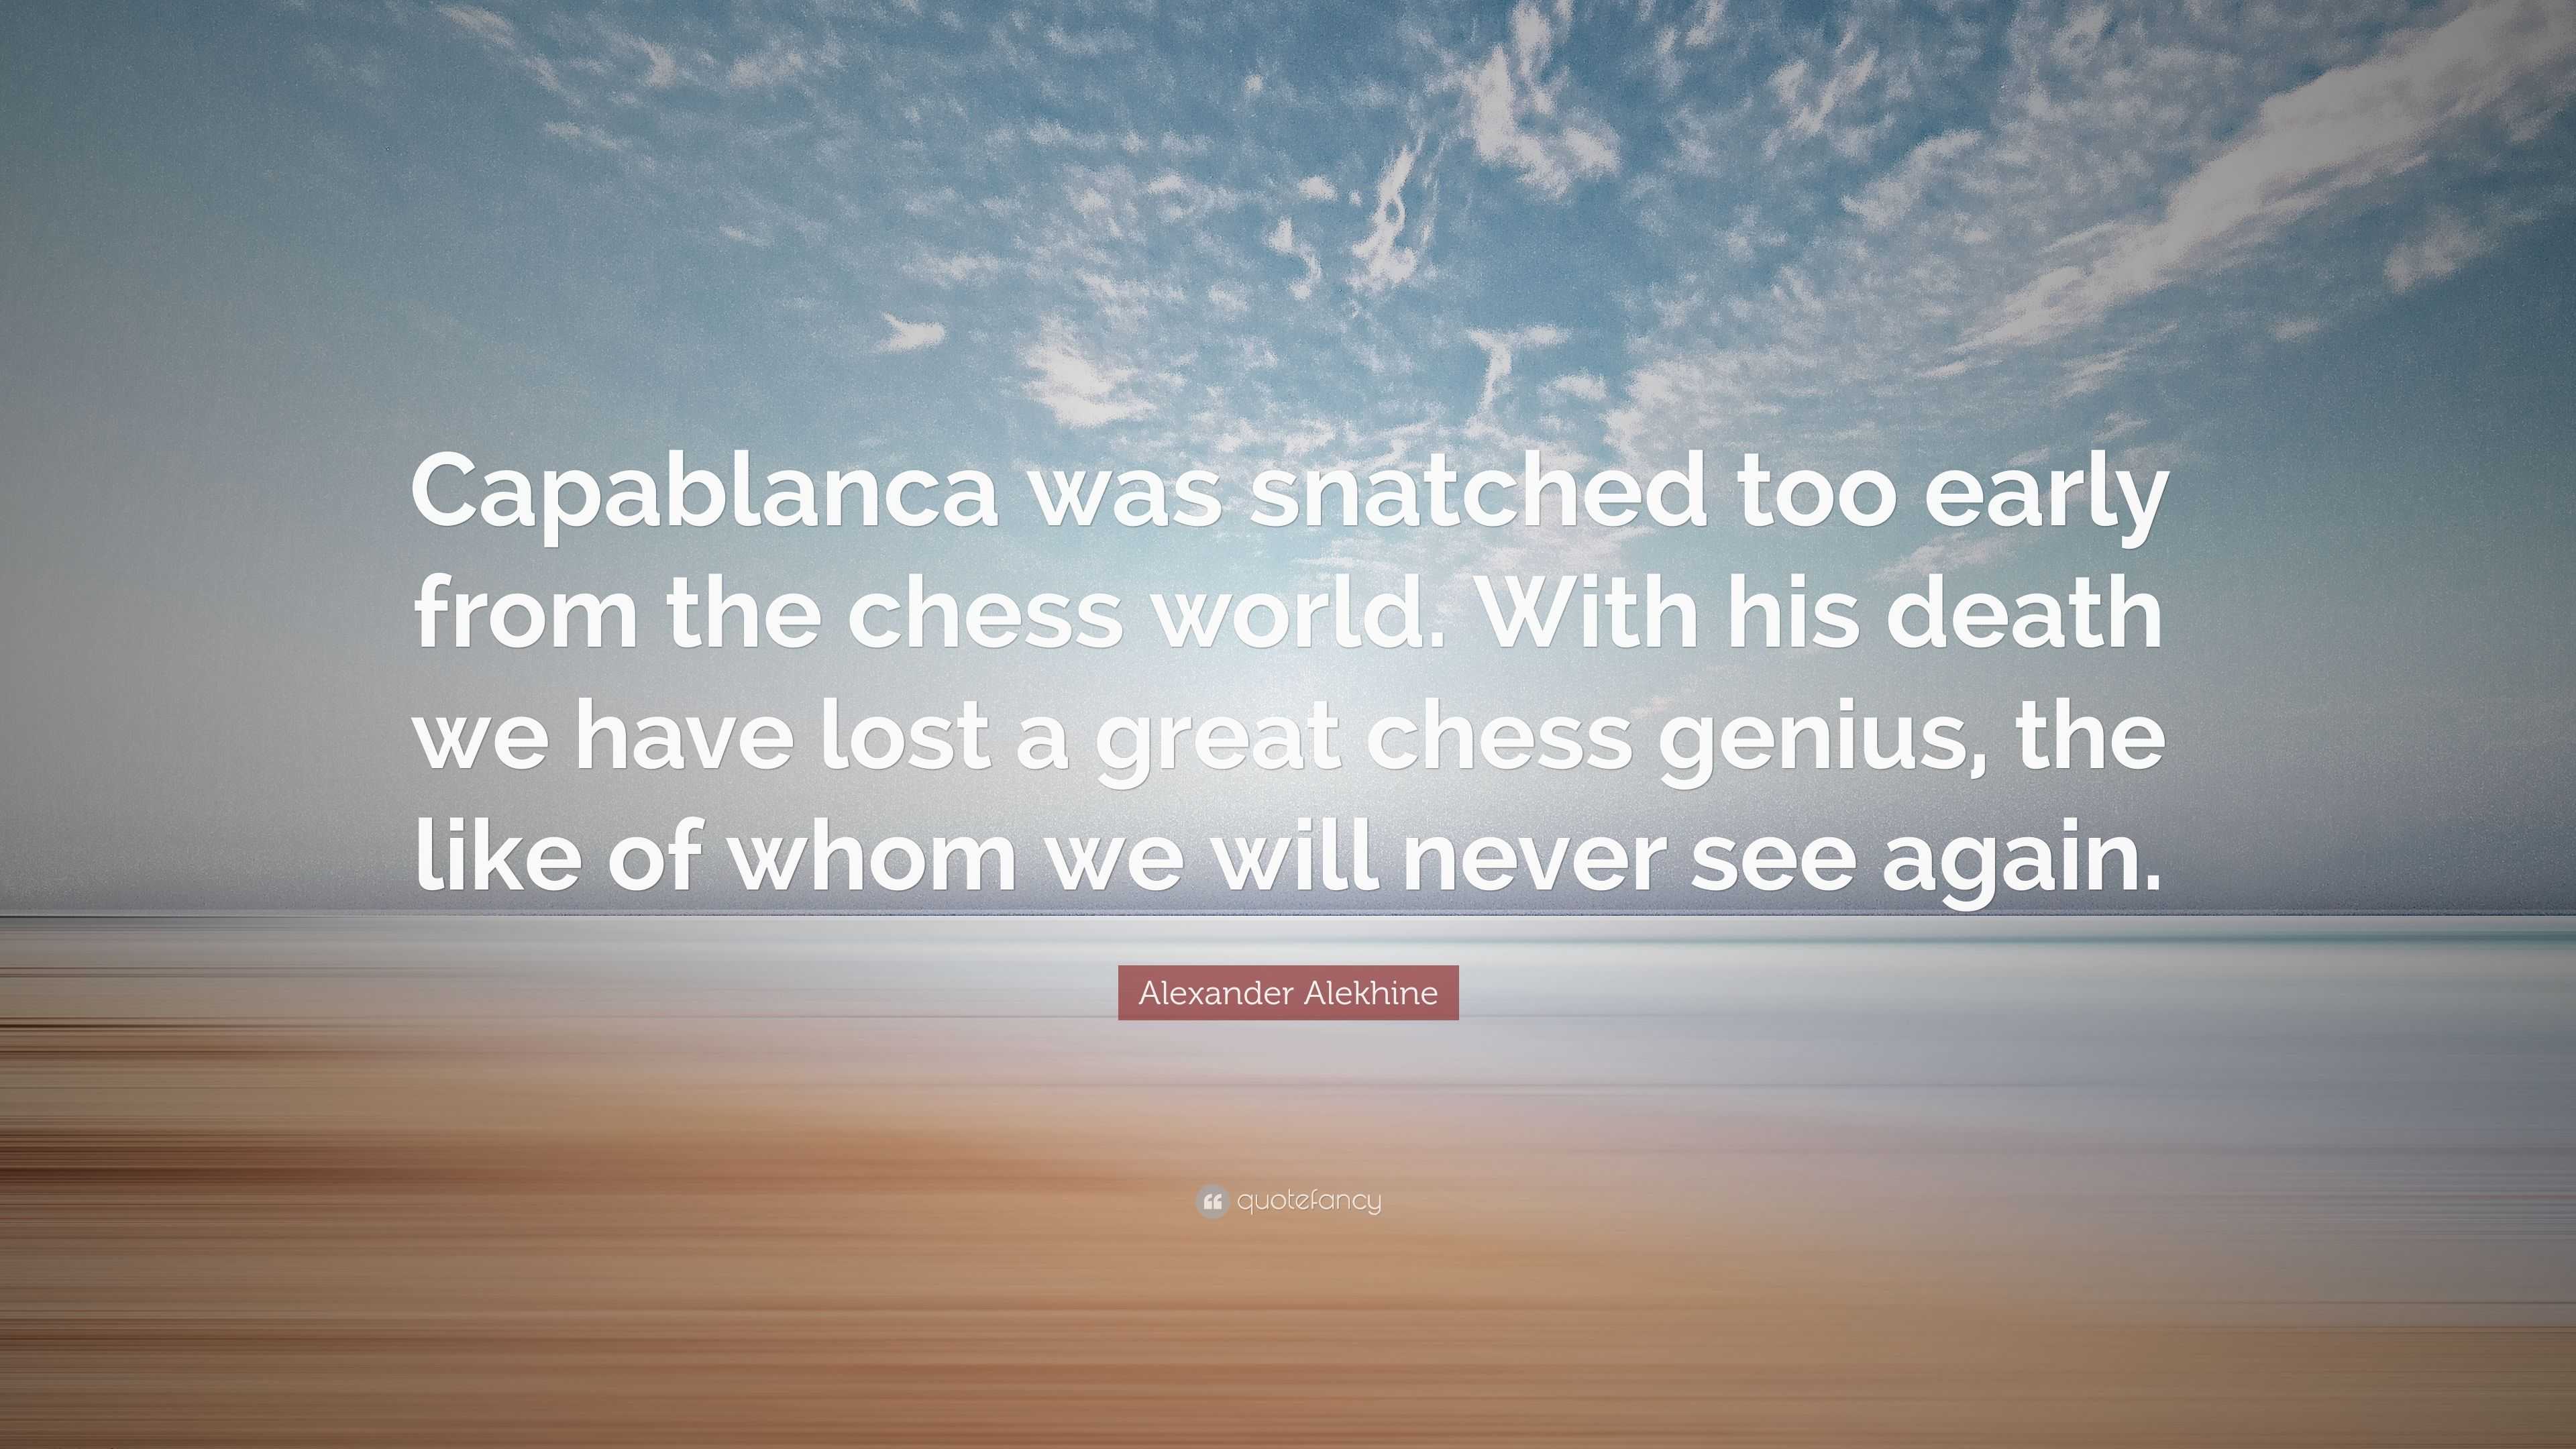 Alexander Alekhine Quote: “Capablanca was snatched too early from the chess  world. With his death we have lost a great chess genius, the like of wh”